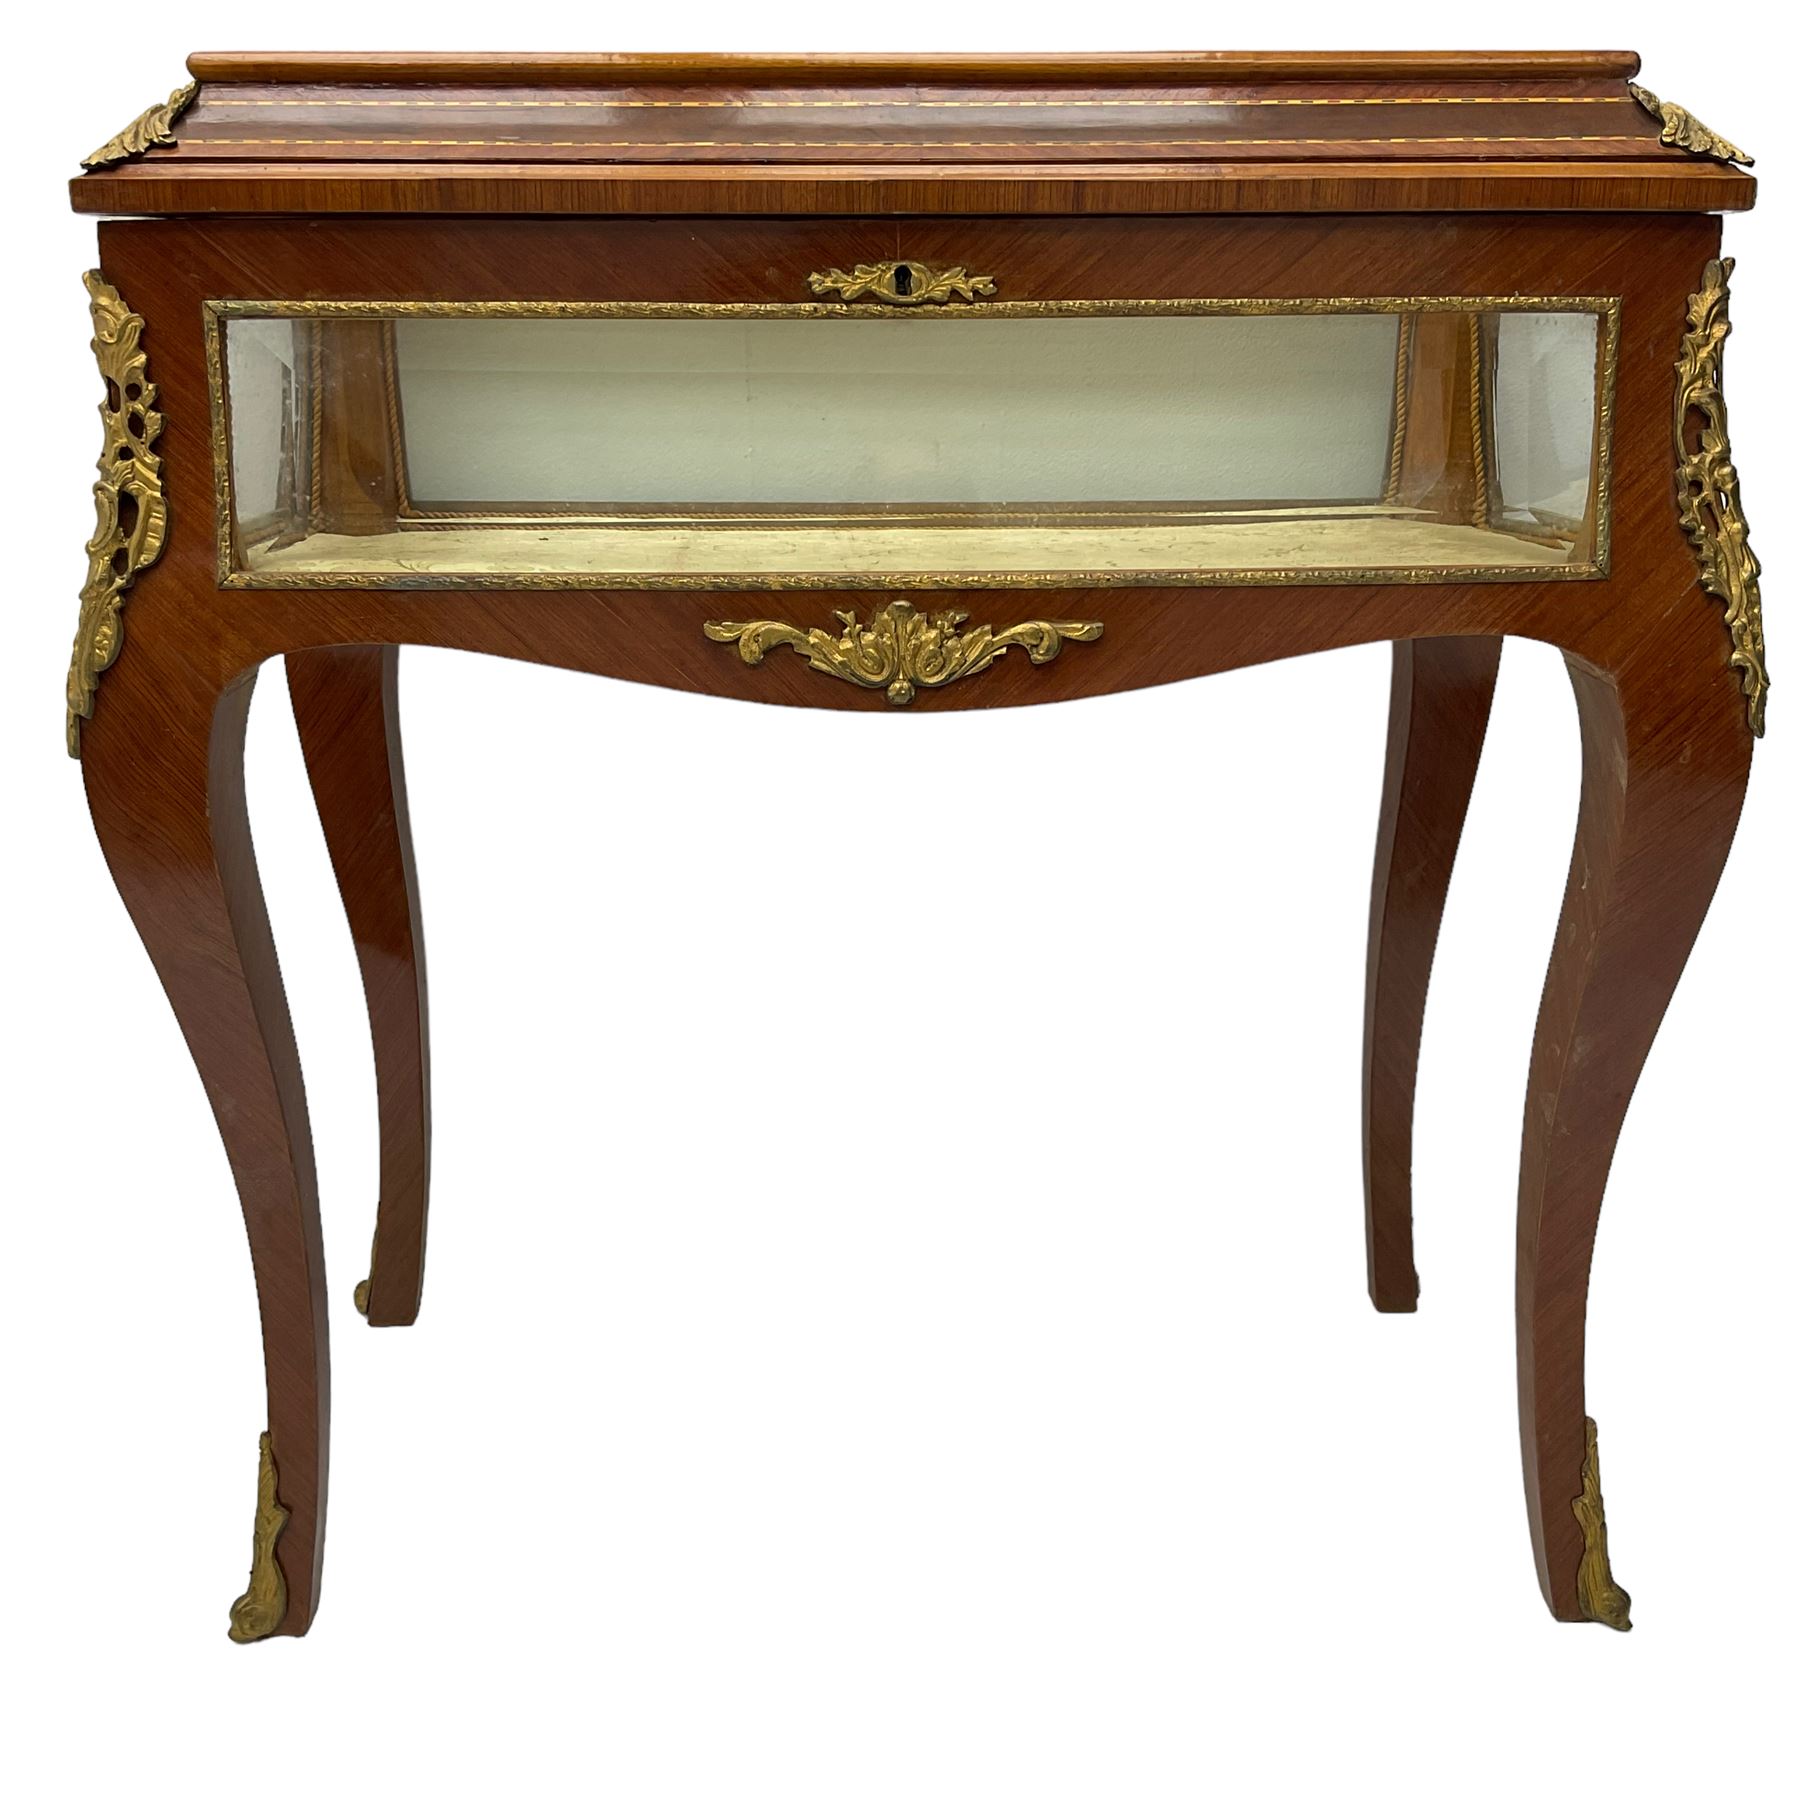 Mid-to-late 20th century French design Kingwood and walnut bijouterie cabinet - Image 2 of 6